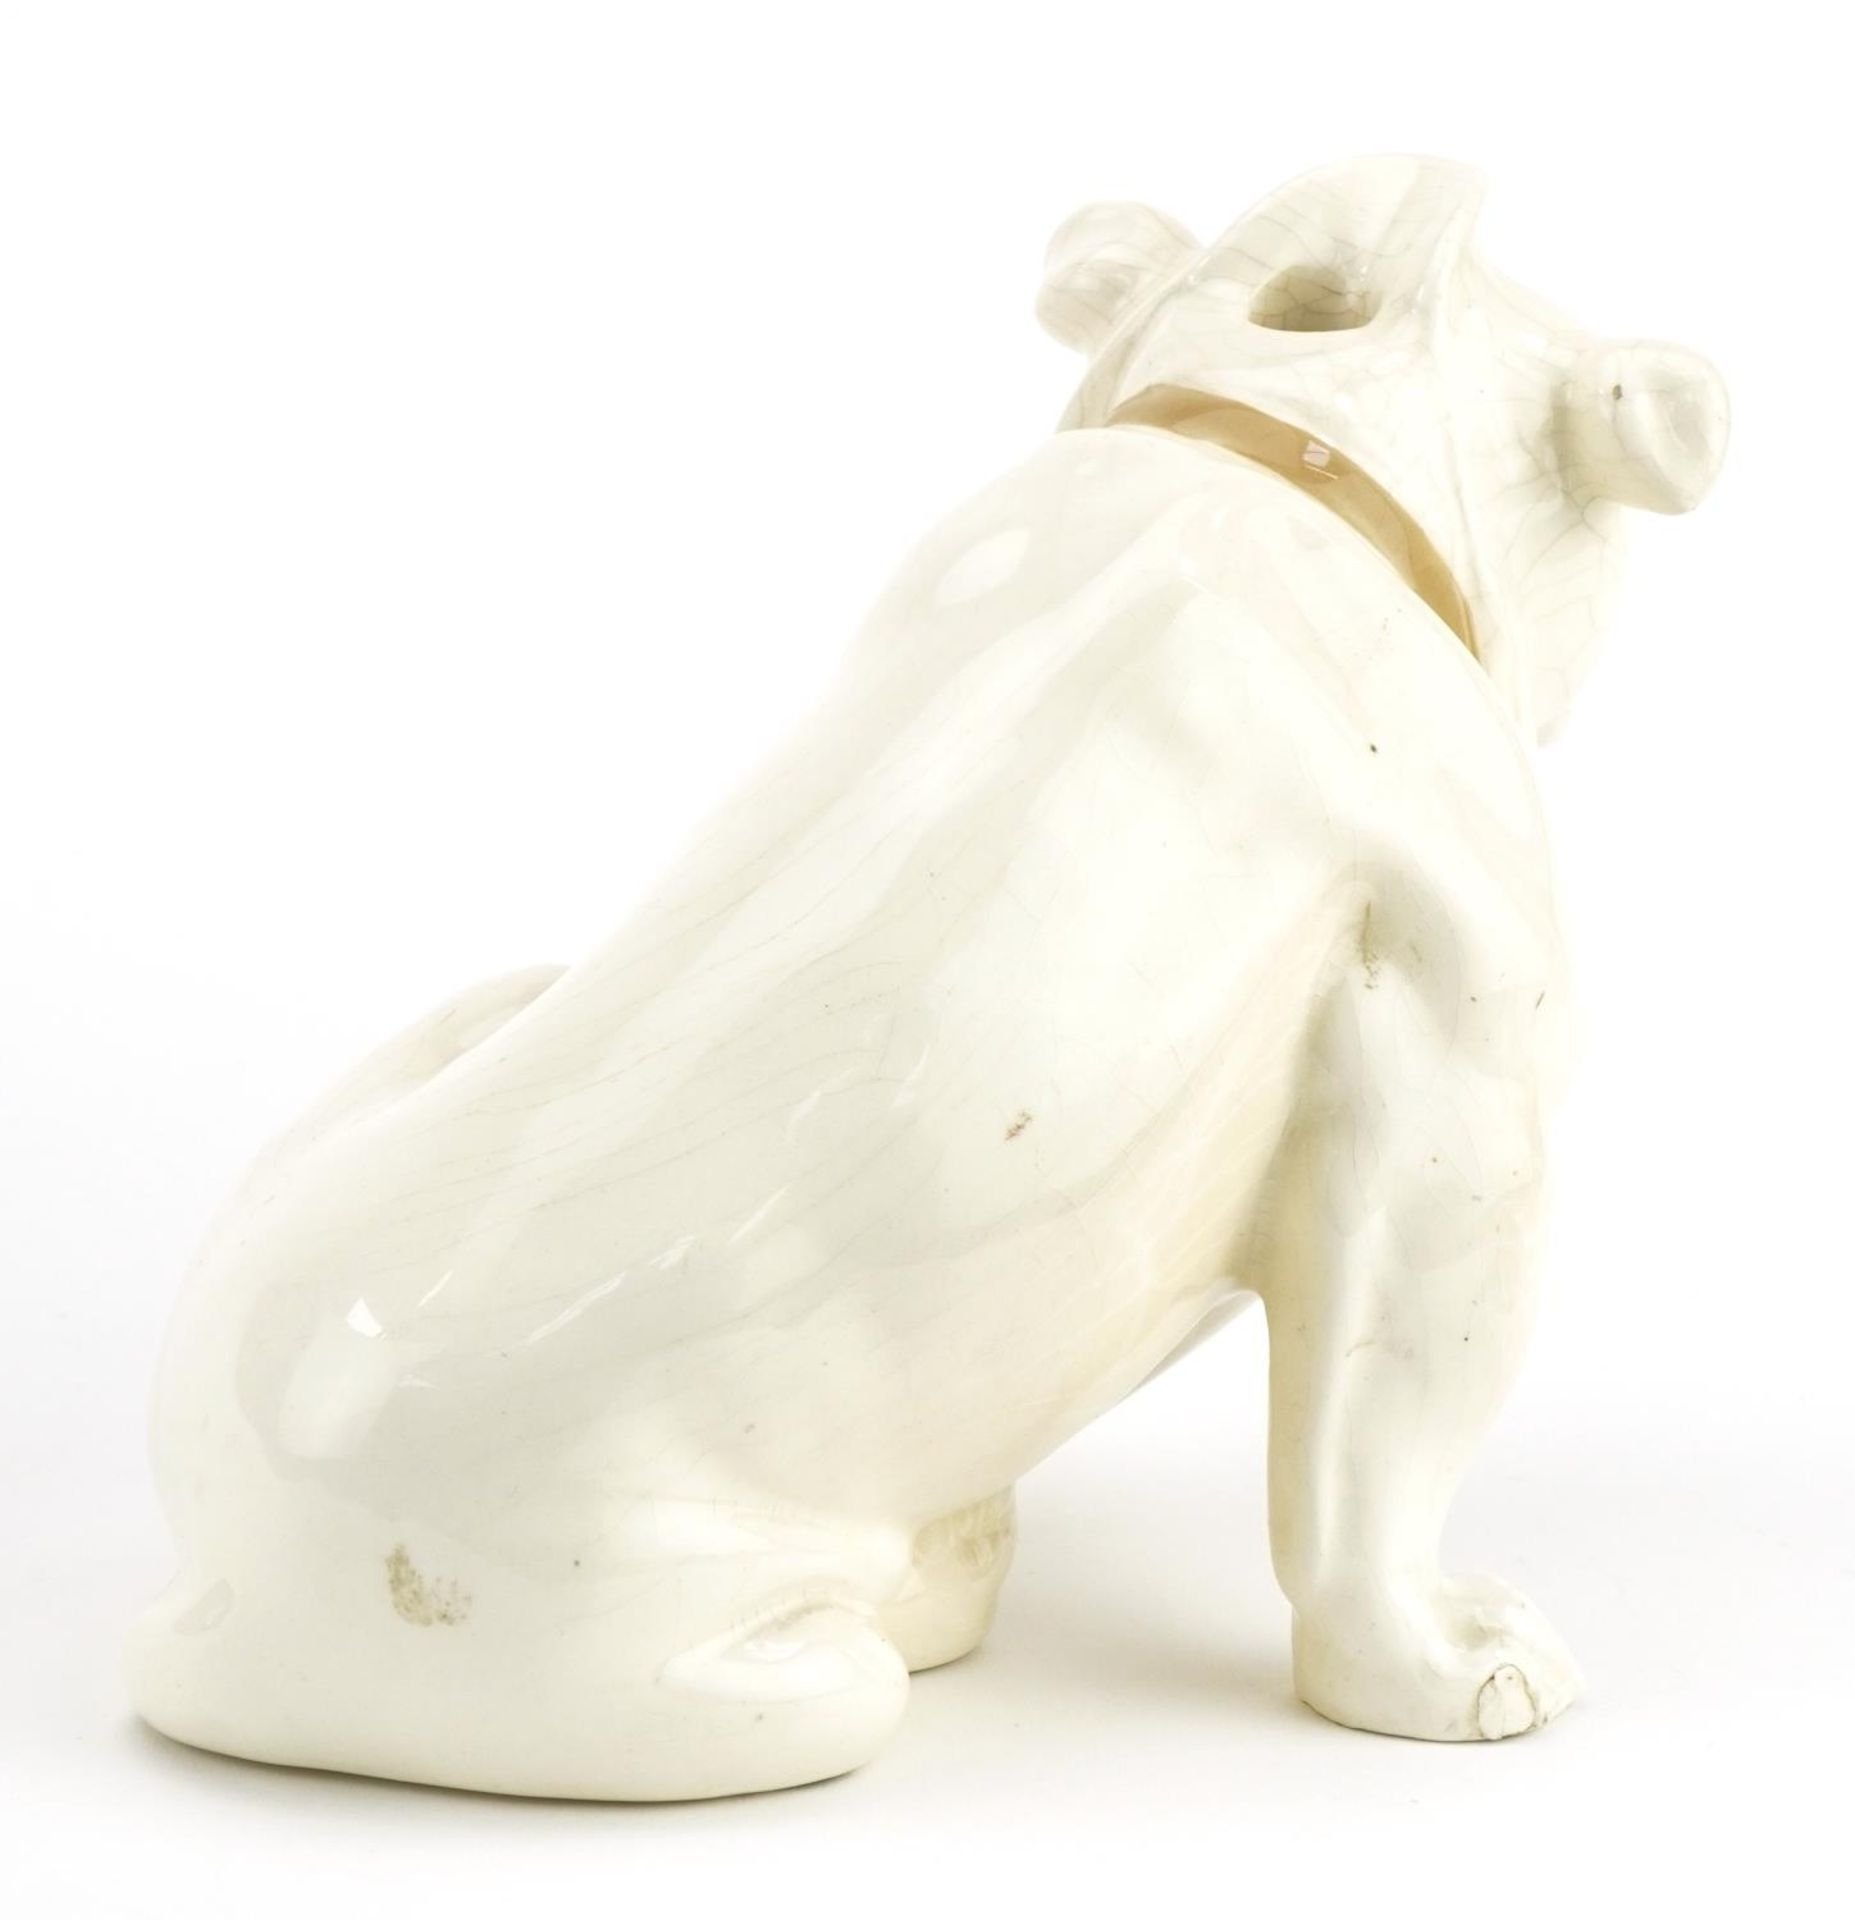 Bols crackle glaze pottery decanter in the form of a Bulldog, 22cm in length - Image 2 of 6